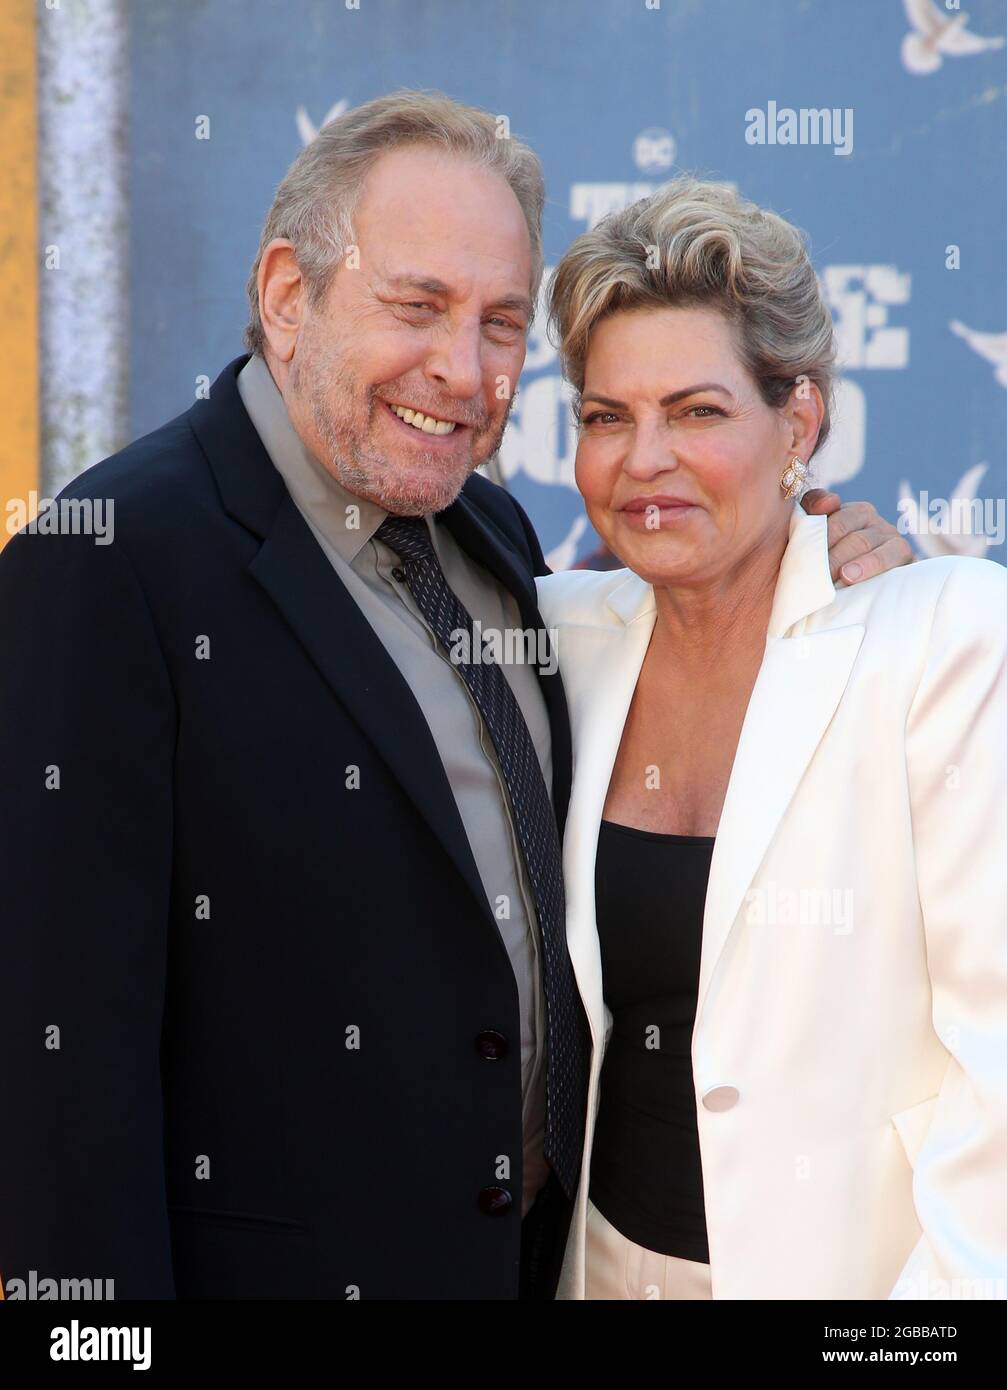 Los Angeles, Ca. 2nd Aug, 2021. Stephanie Haymes-Roven, Charles Roven, at Warner Bros. Premiere Of 'The Suicide Squad' at Regency Village Theatre in Los Angeles, California on August 2, 2021. Credit: Faye Sadou/Media Punch/Alamy Live News Stock Photo